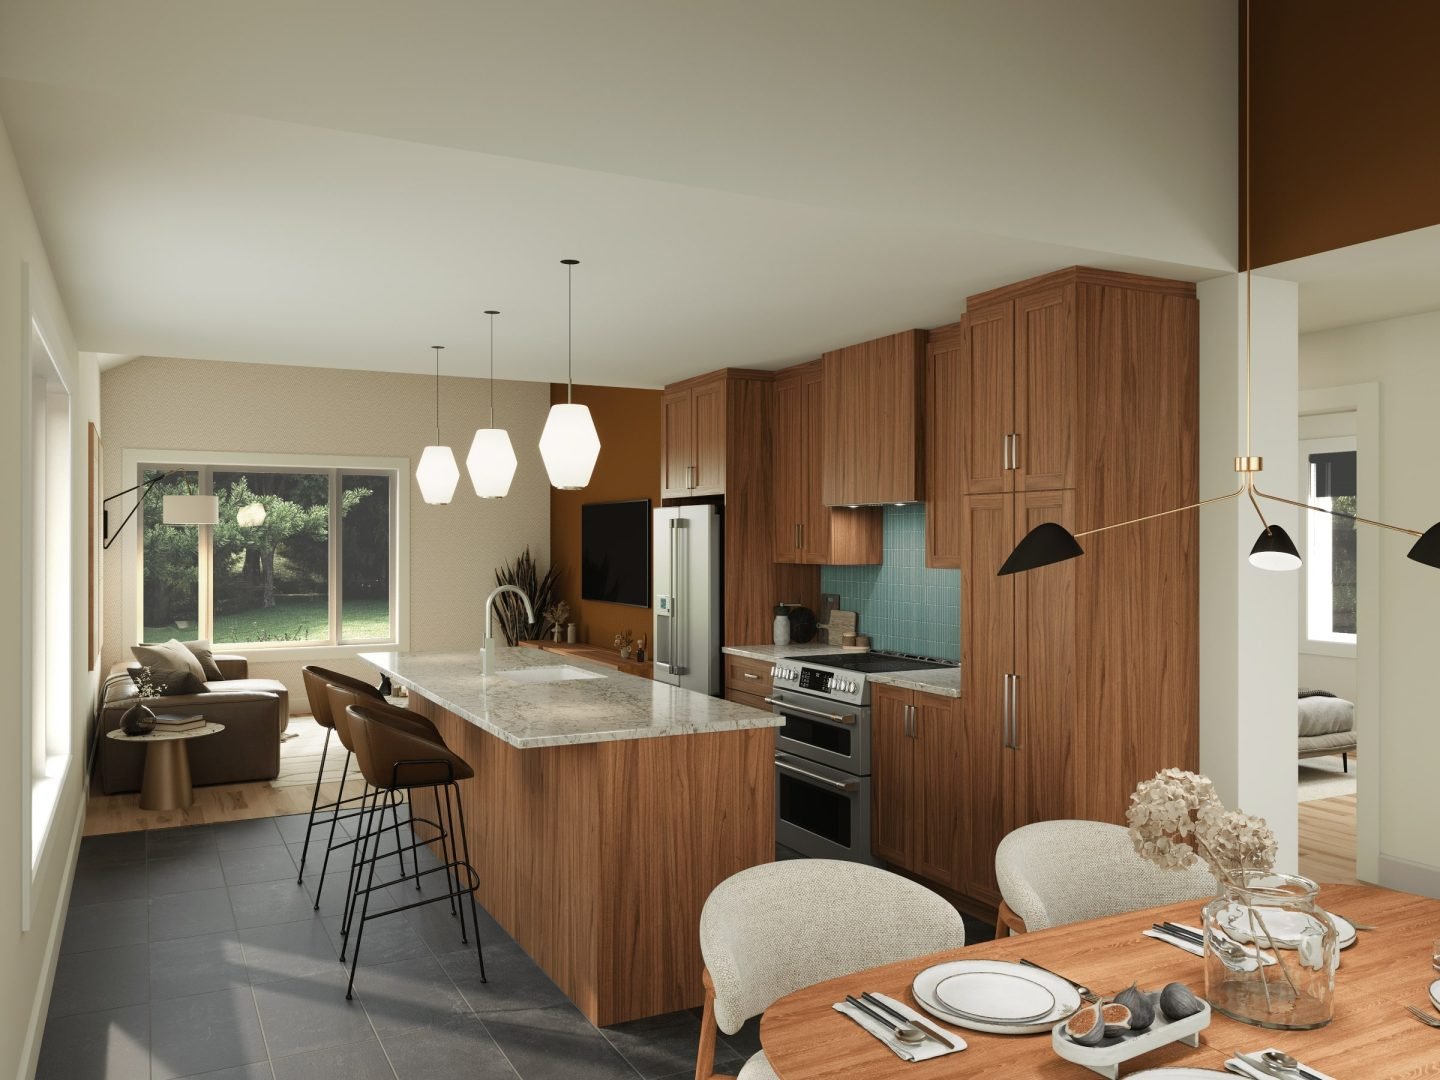 The Svalla model is a midcentury-style chalet. View from the kitchen.